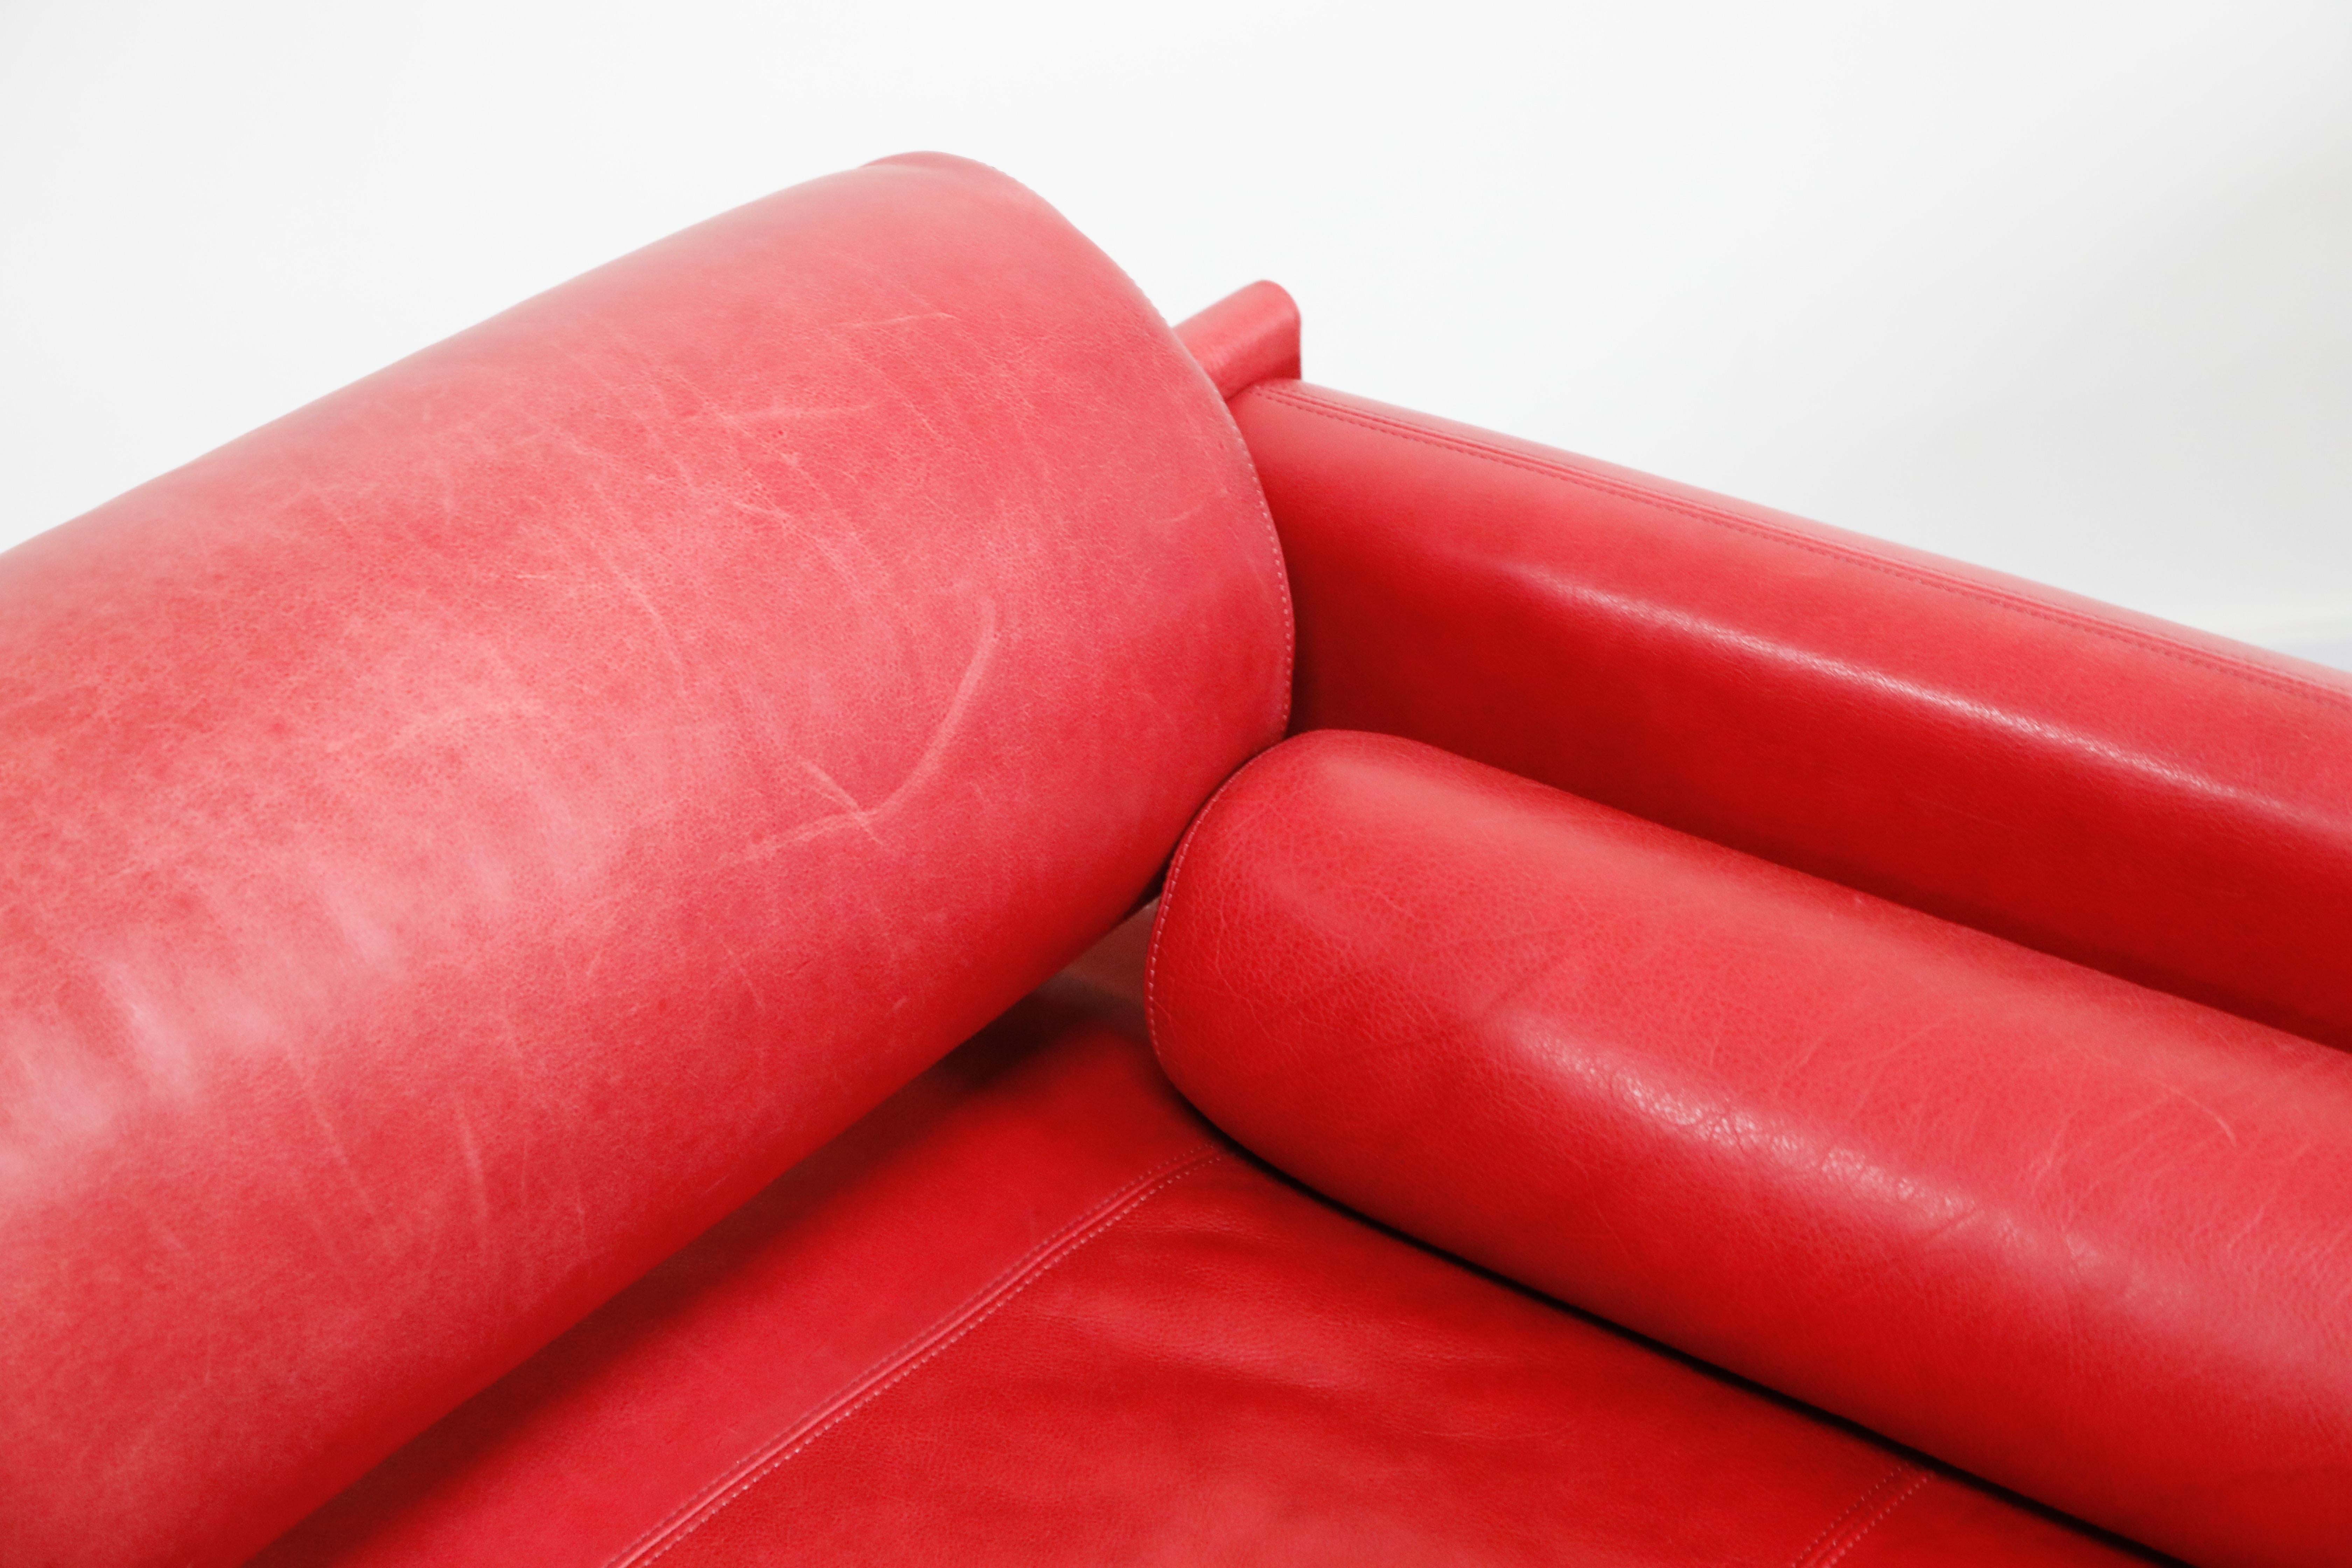 Vladimir Kagan for American Leather 'Matinee' Red Leather Sofa Daybed, Signed 2